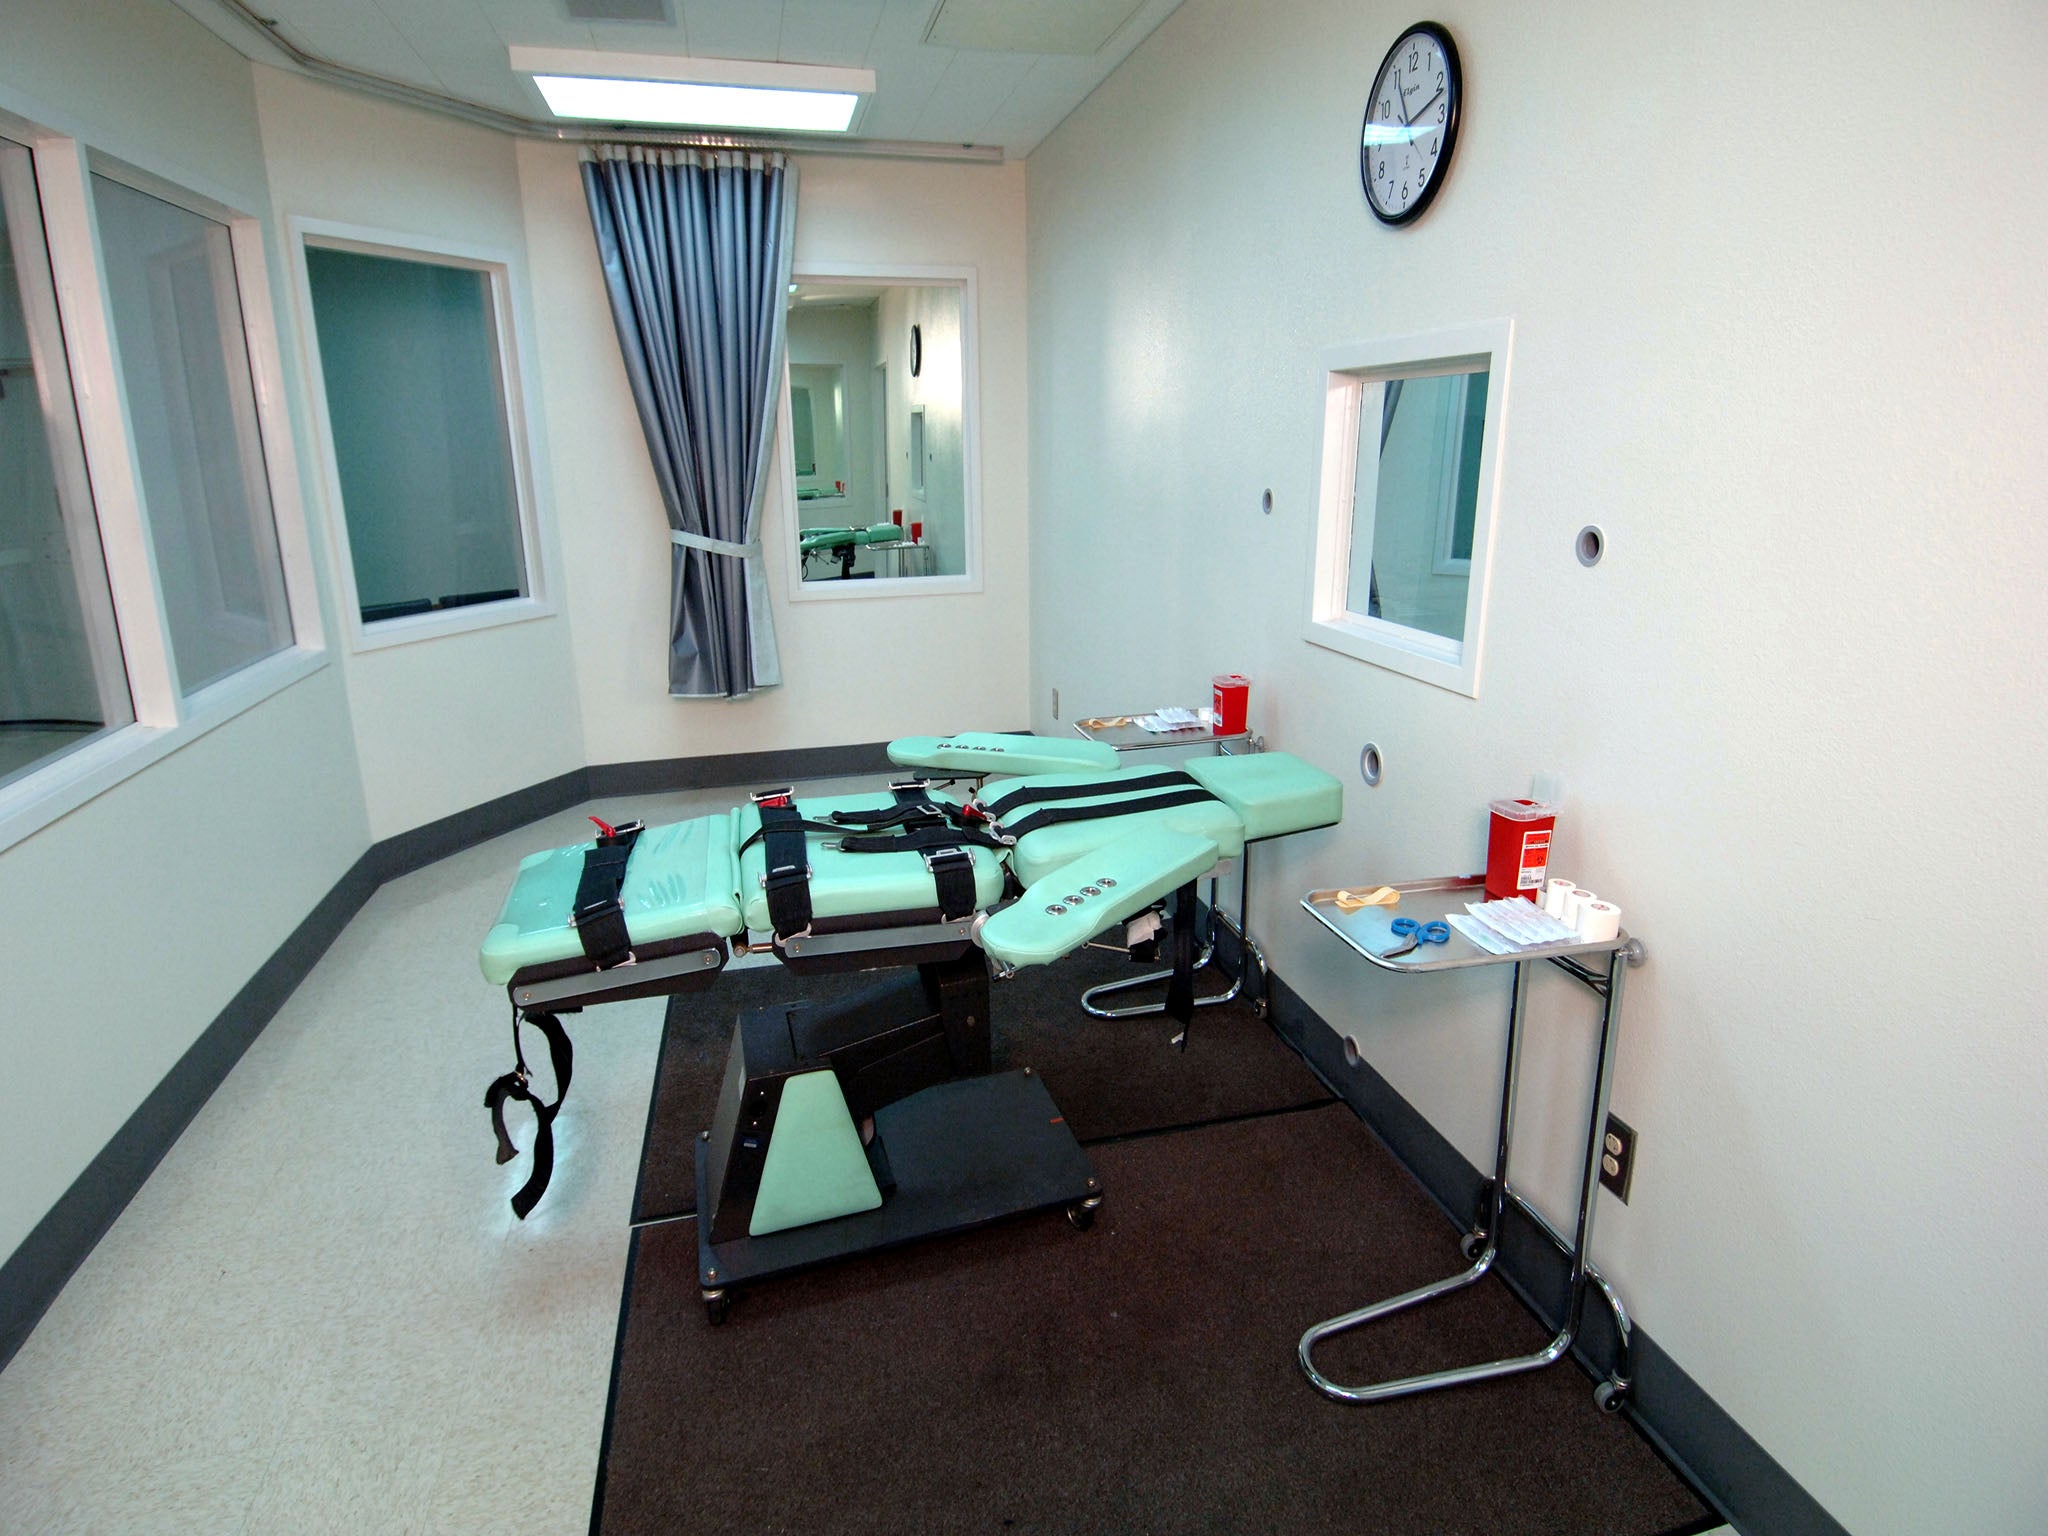 The US Supreme Court will take up a case regarding lethal injections in the state of Oklahoma. Wikimedia Commons.